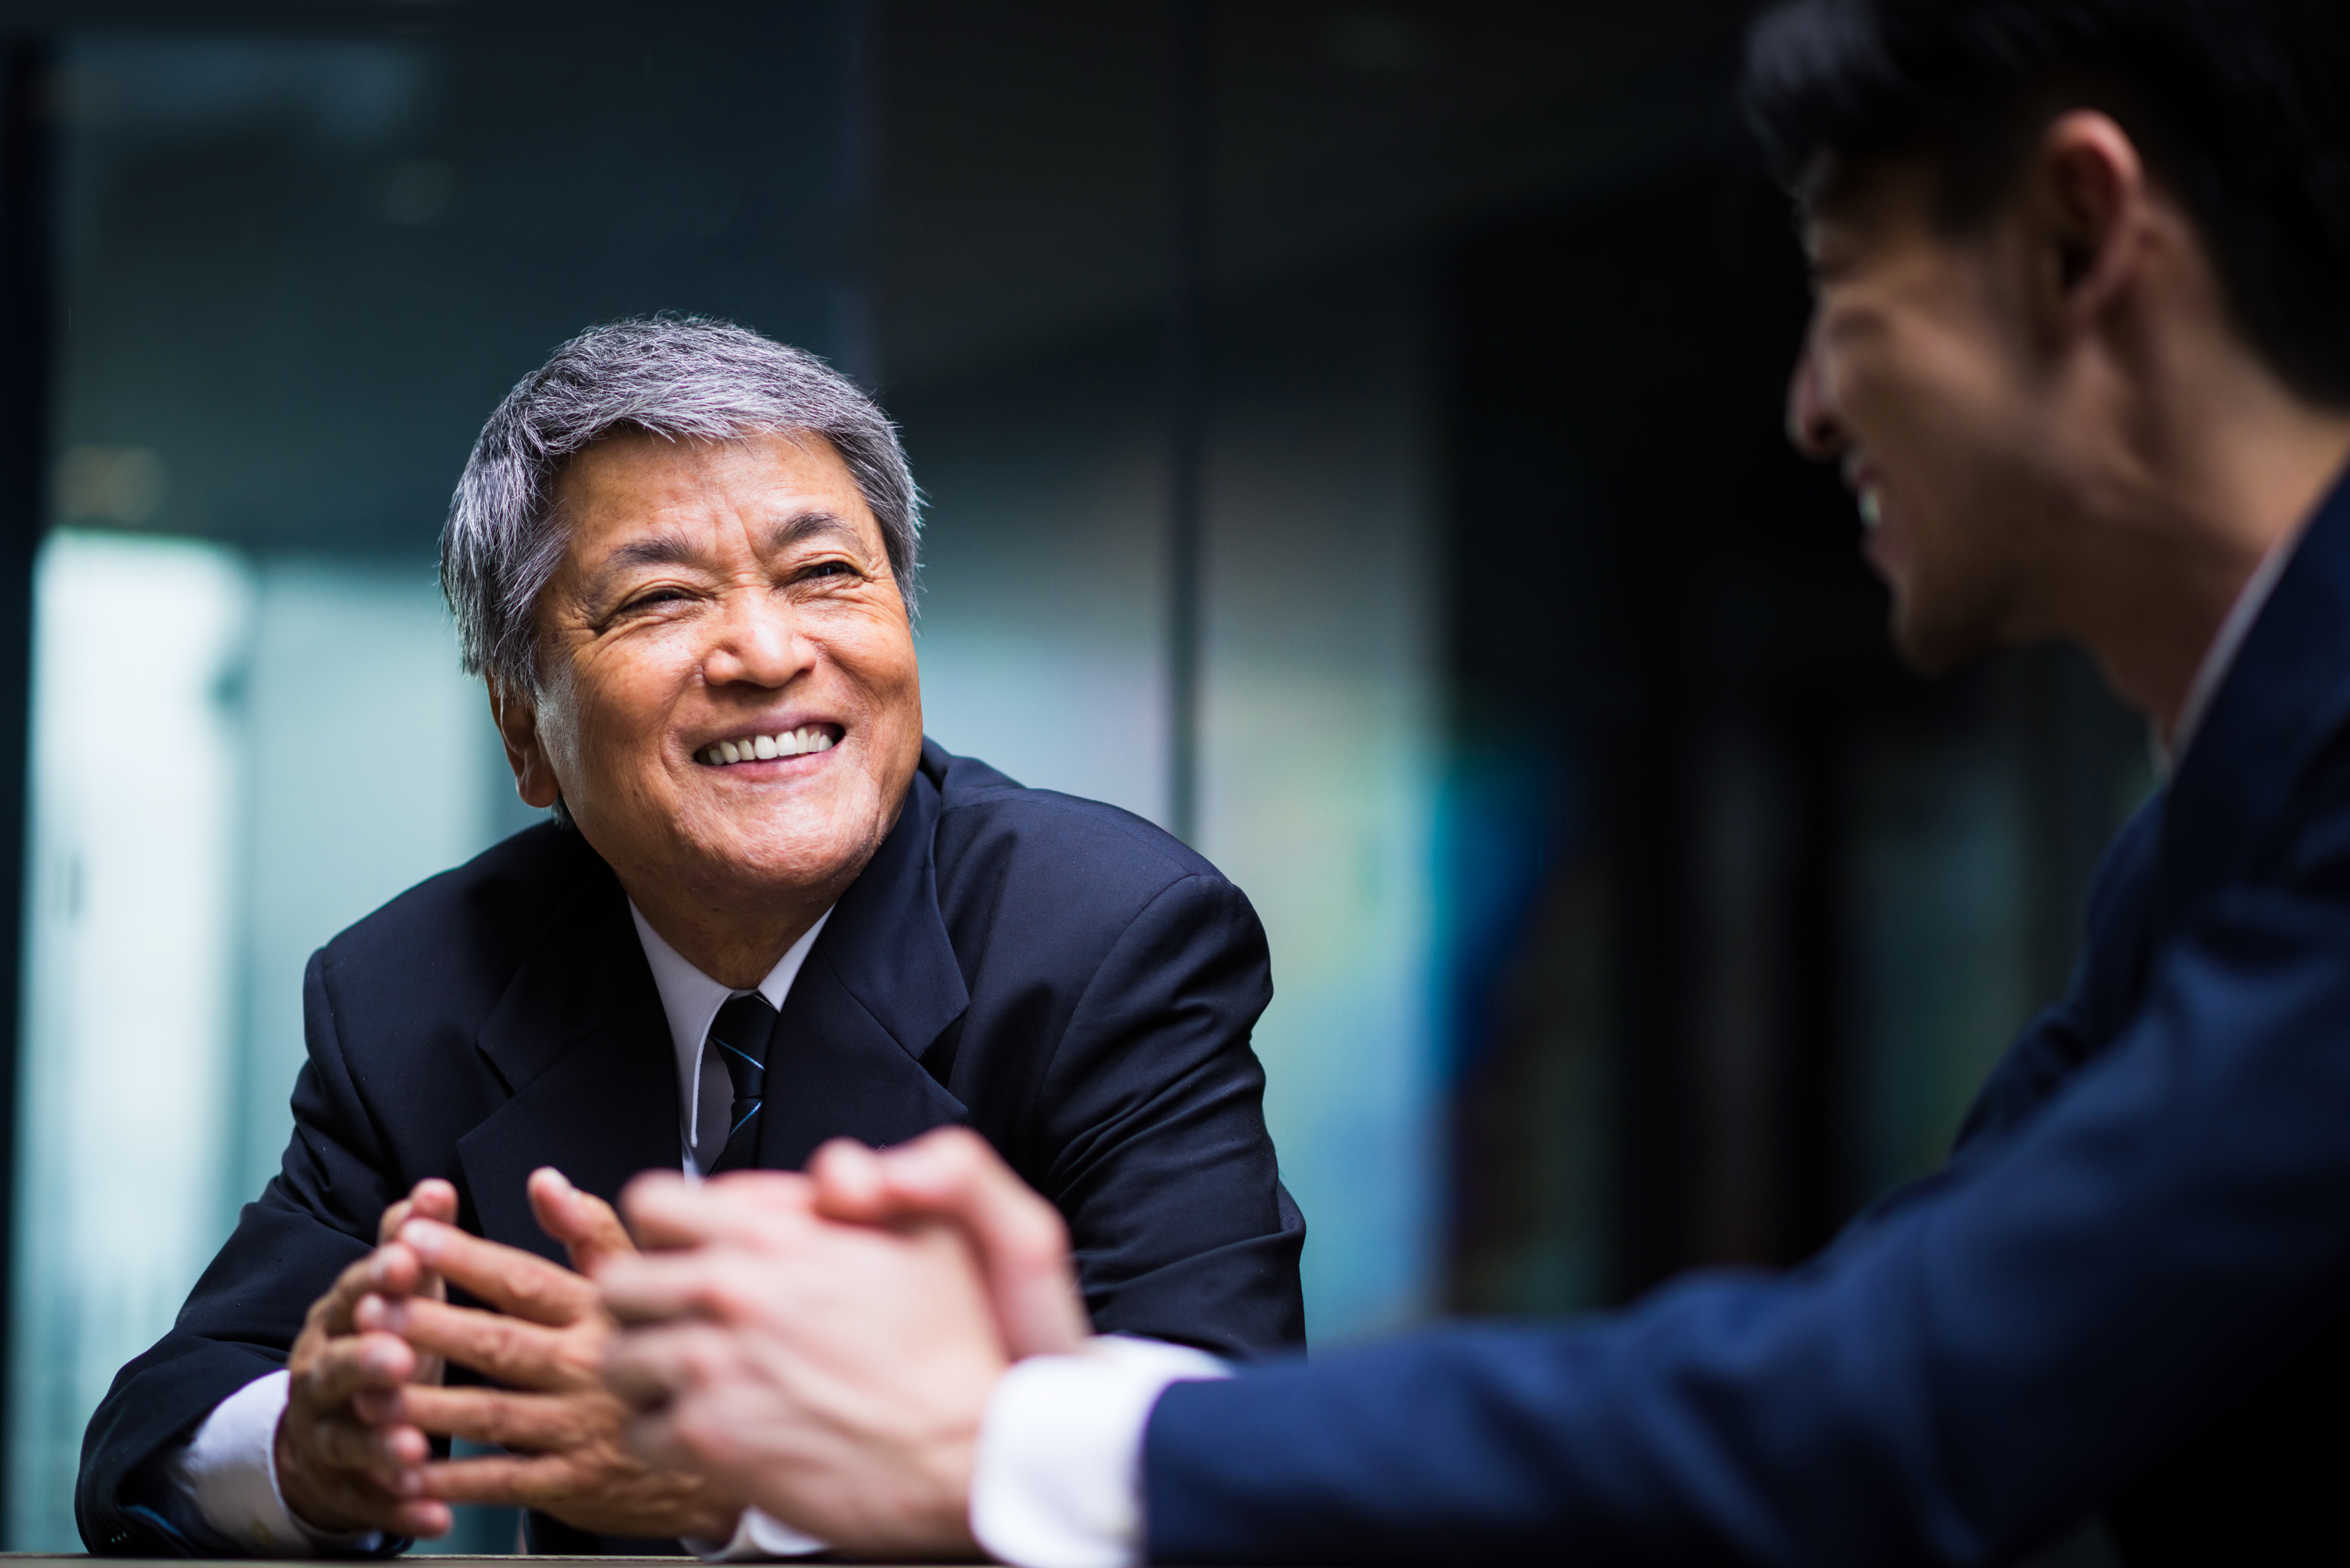 image of two men in business suites smiling 